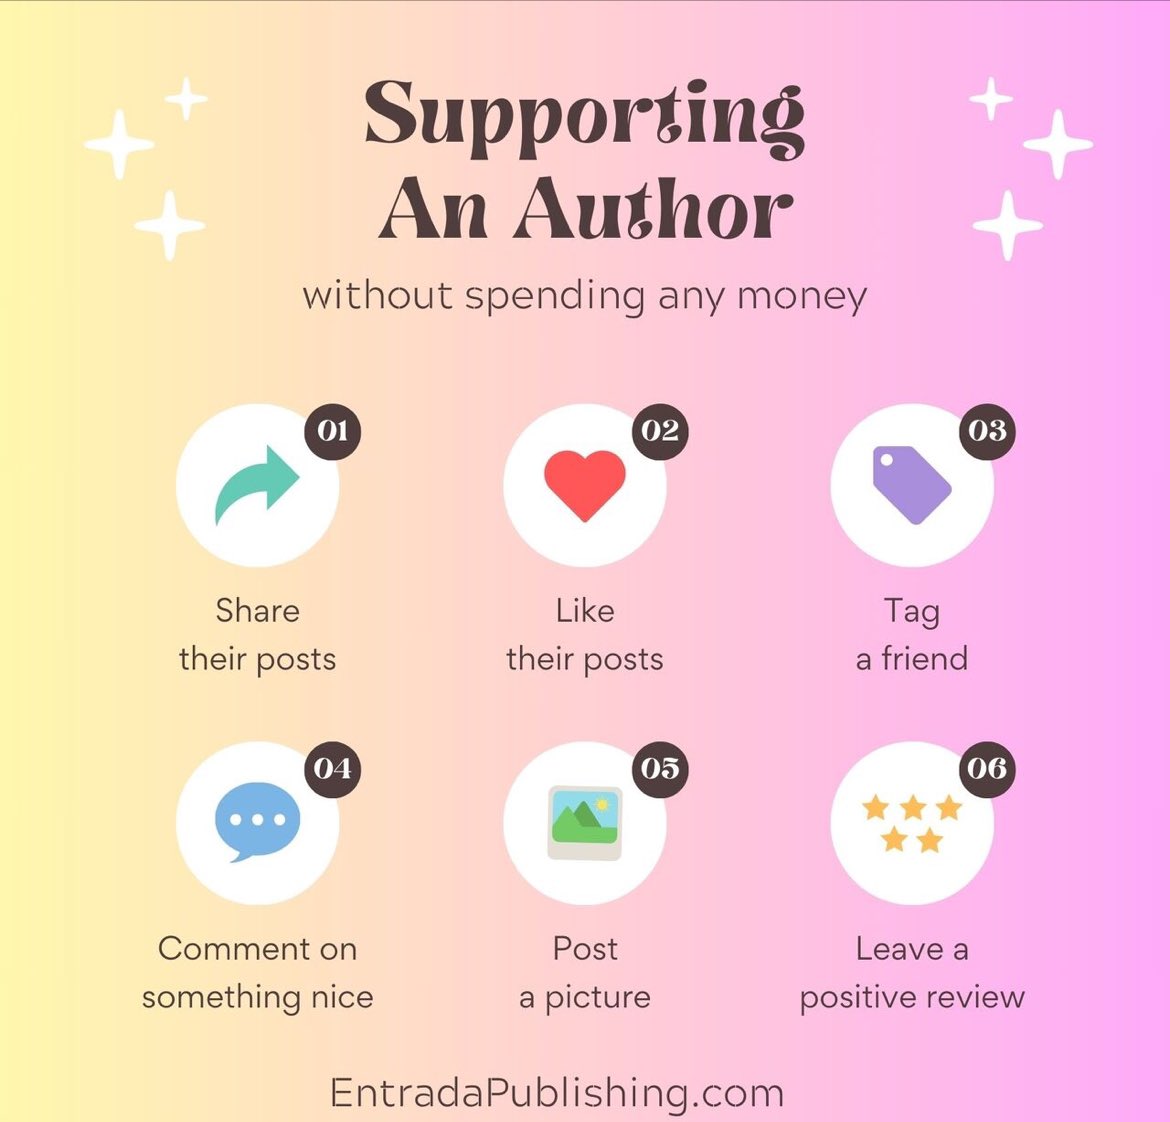 For most writers the marketing is a grind. We cringe when self-promoting fearing we’ll exhaust our followers with all the 'Look at me!' Yet, it's how we find readers for our books (which we've spent YEARS writing, so we want people to read them). Ways to help #writers you know: